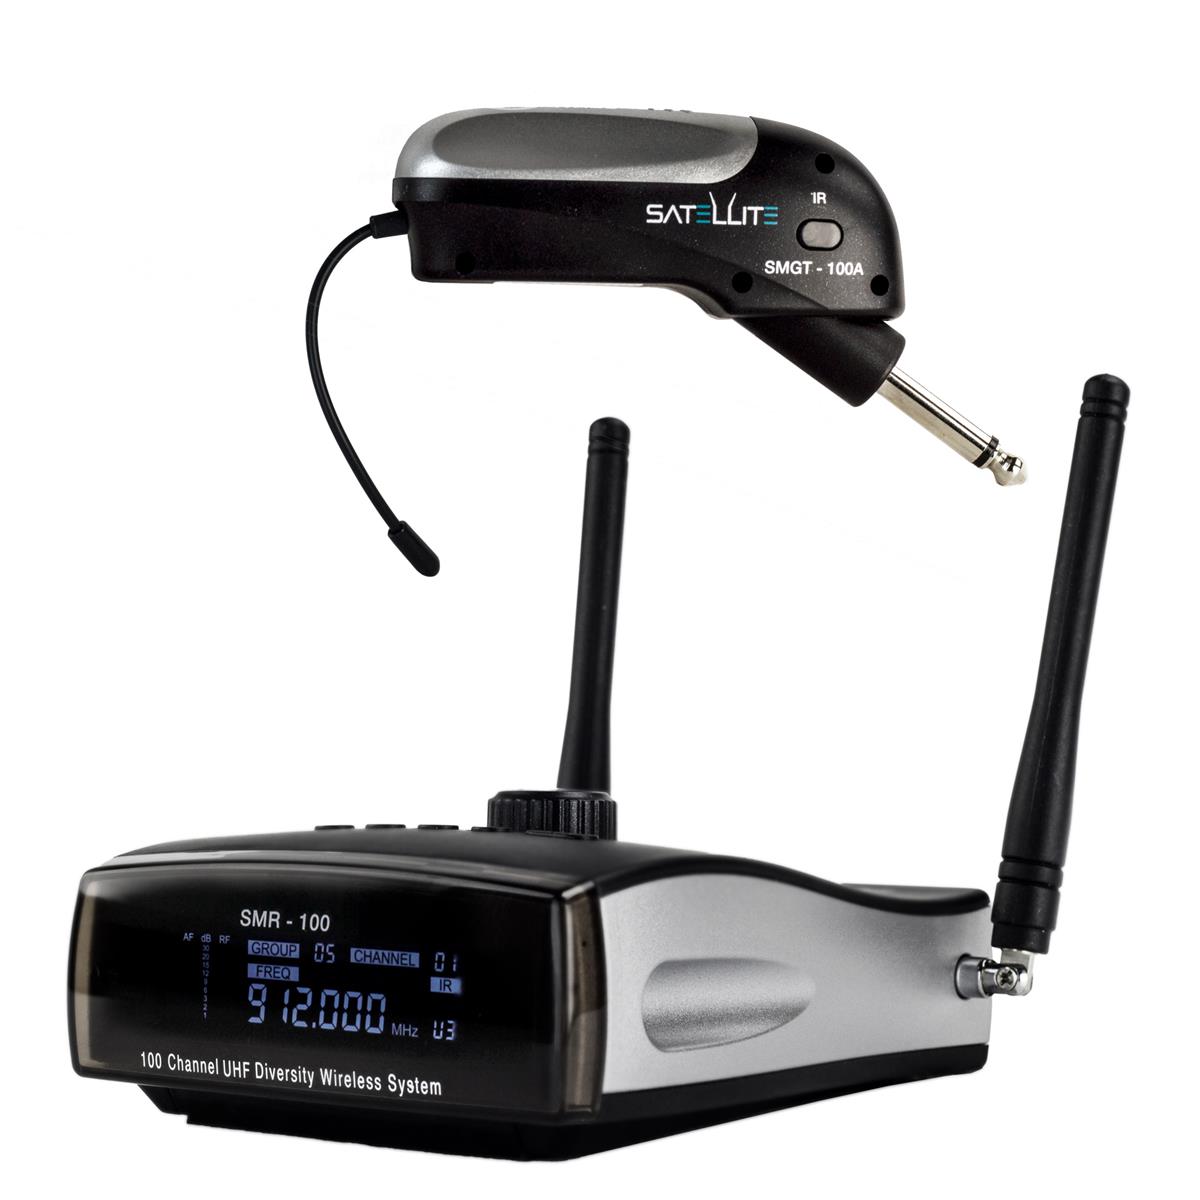 Nady Satellite 100Ch Wireless Instrument System for Electric Guitar,RecessedJack -  SATELLITE-SMGT-100A